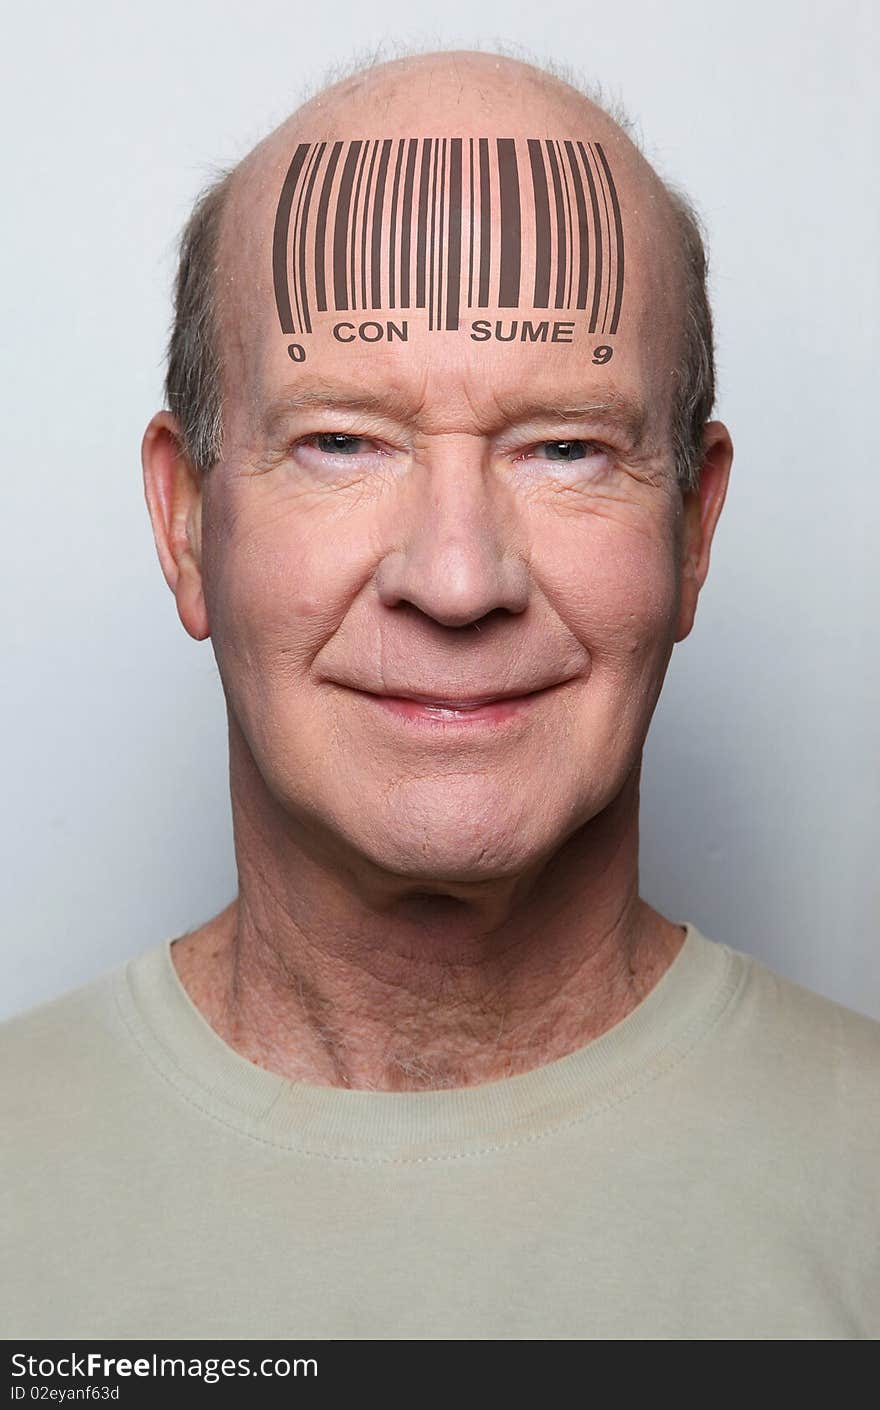 Happy and ignorant consumer with a bar code on his forehead. Happy and ignorant consumer with a bar code on his forehead